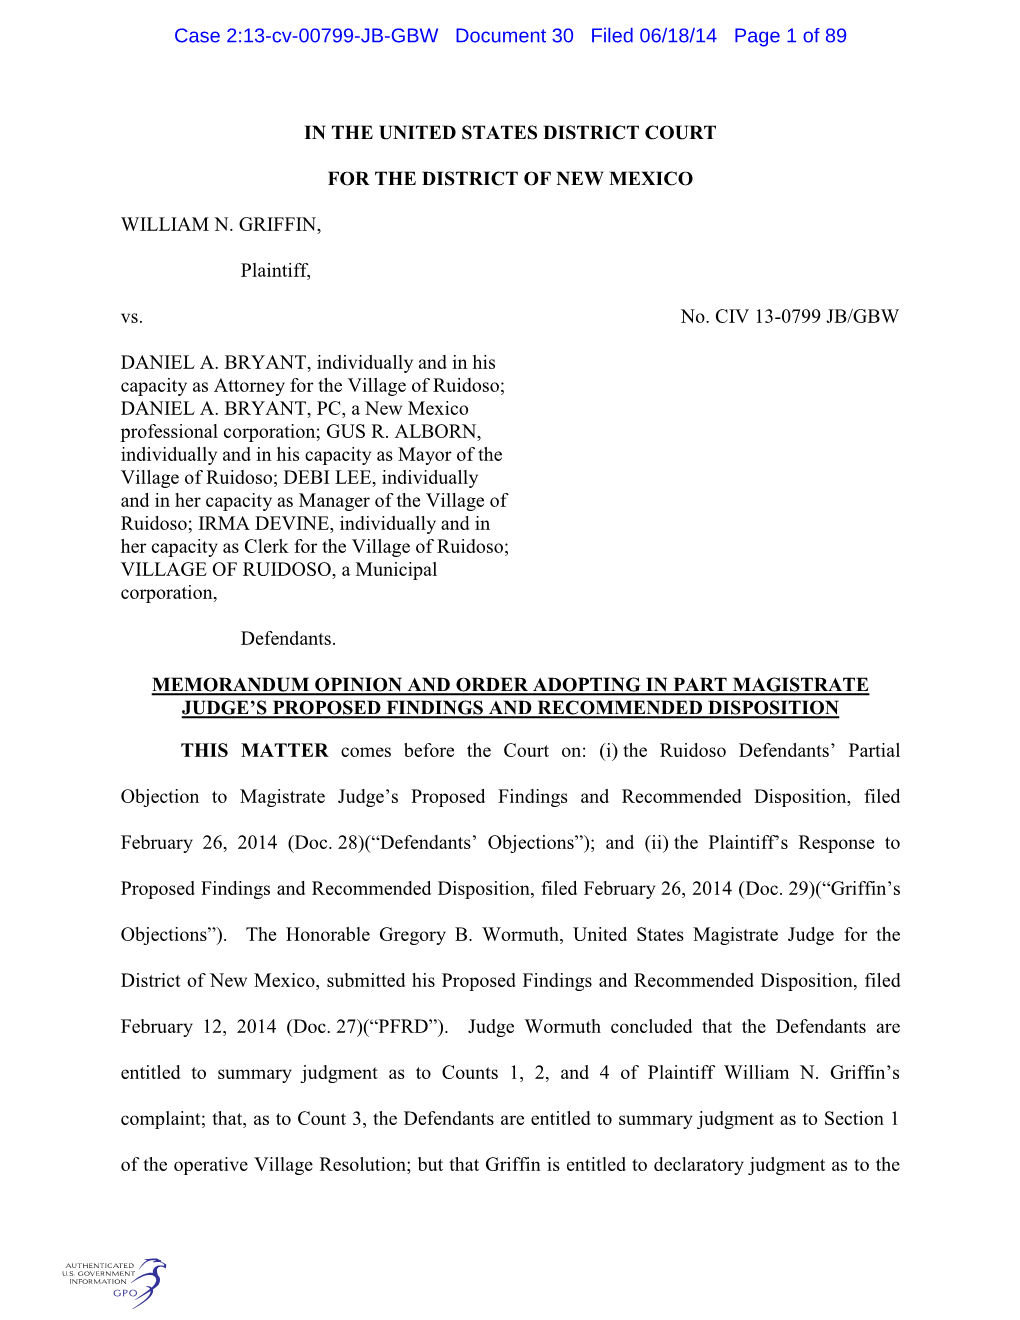 Case 2:13-Cv-00799-JB-GBW Document 30 Filed 06/18/14 Page 1 of 89